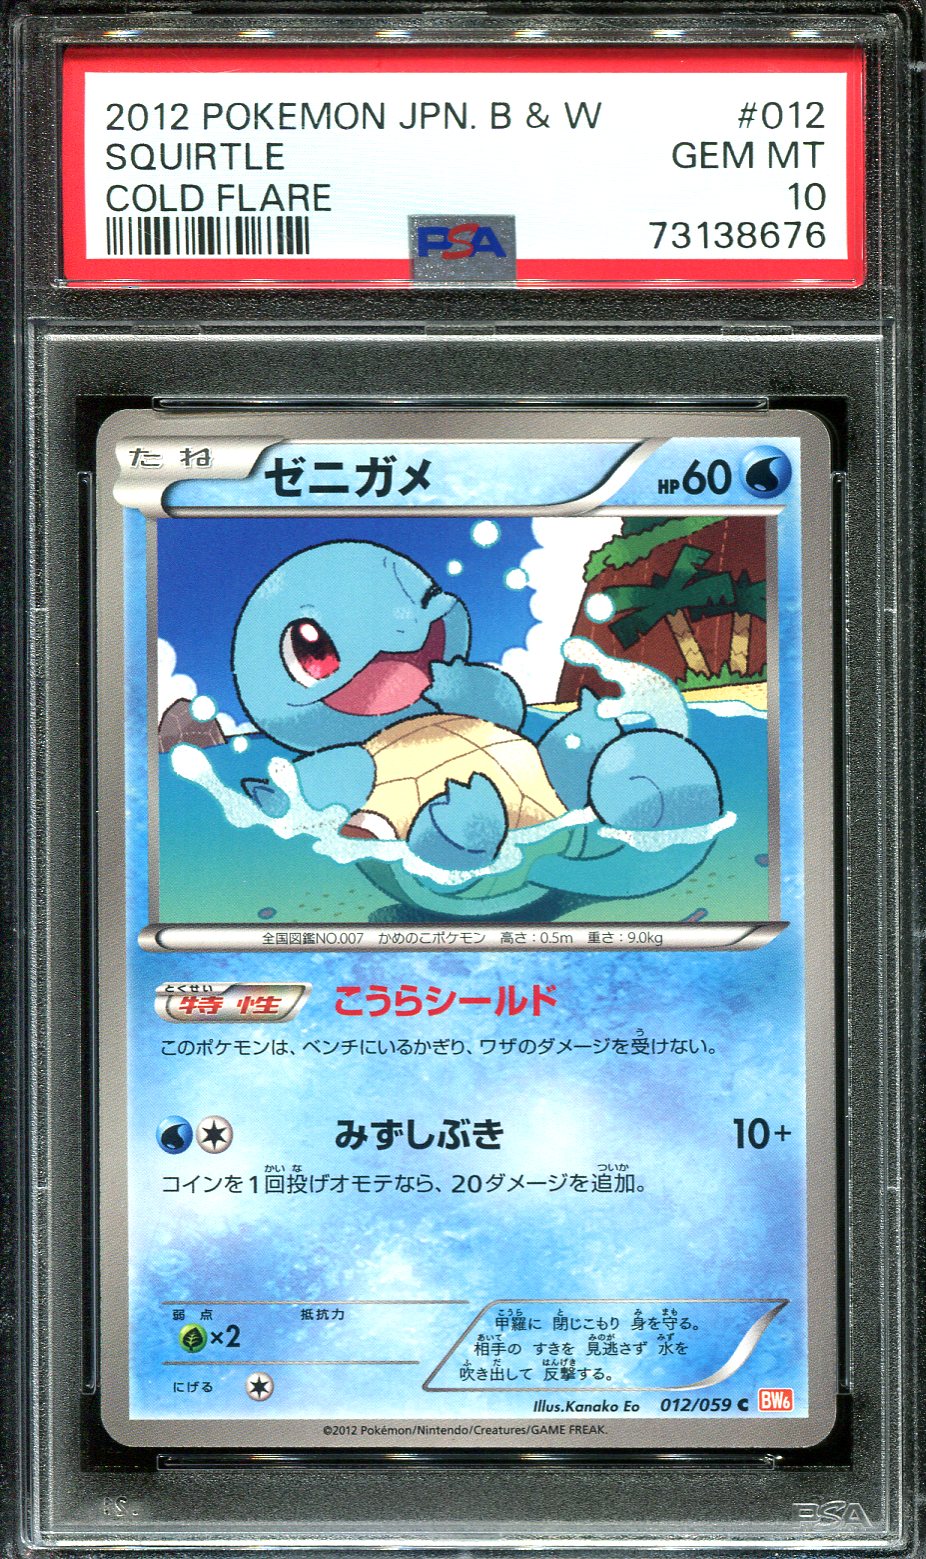 SQUIRTLE 012/059 PSA 10 POKEMON COLD FLARE BW6 JAPANESE